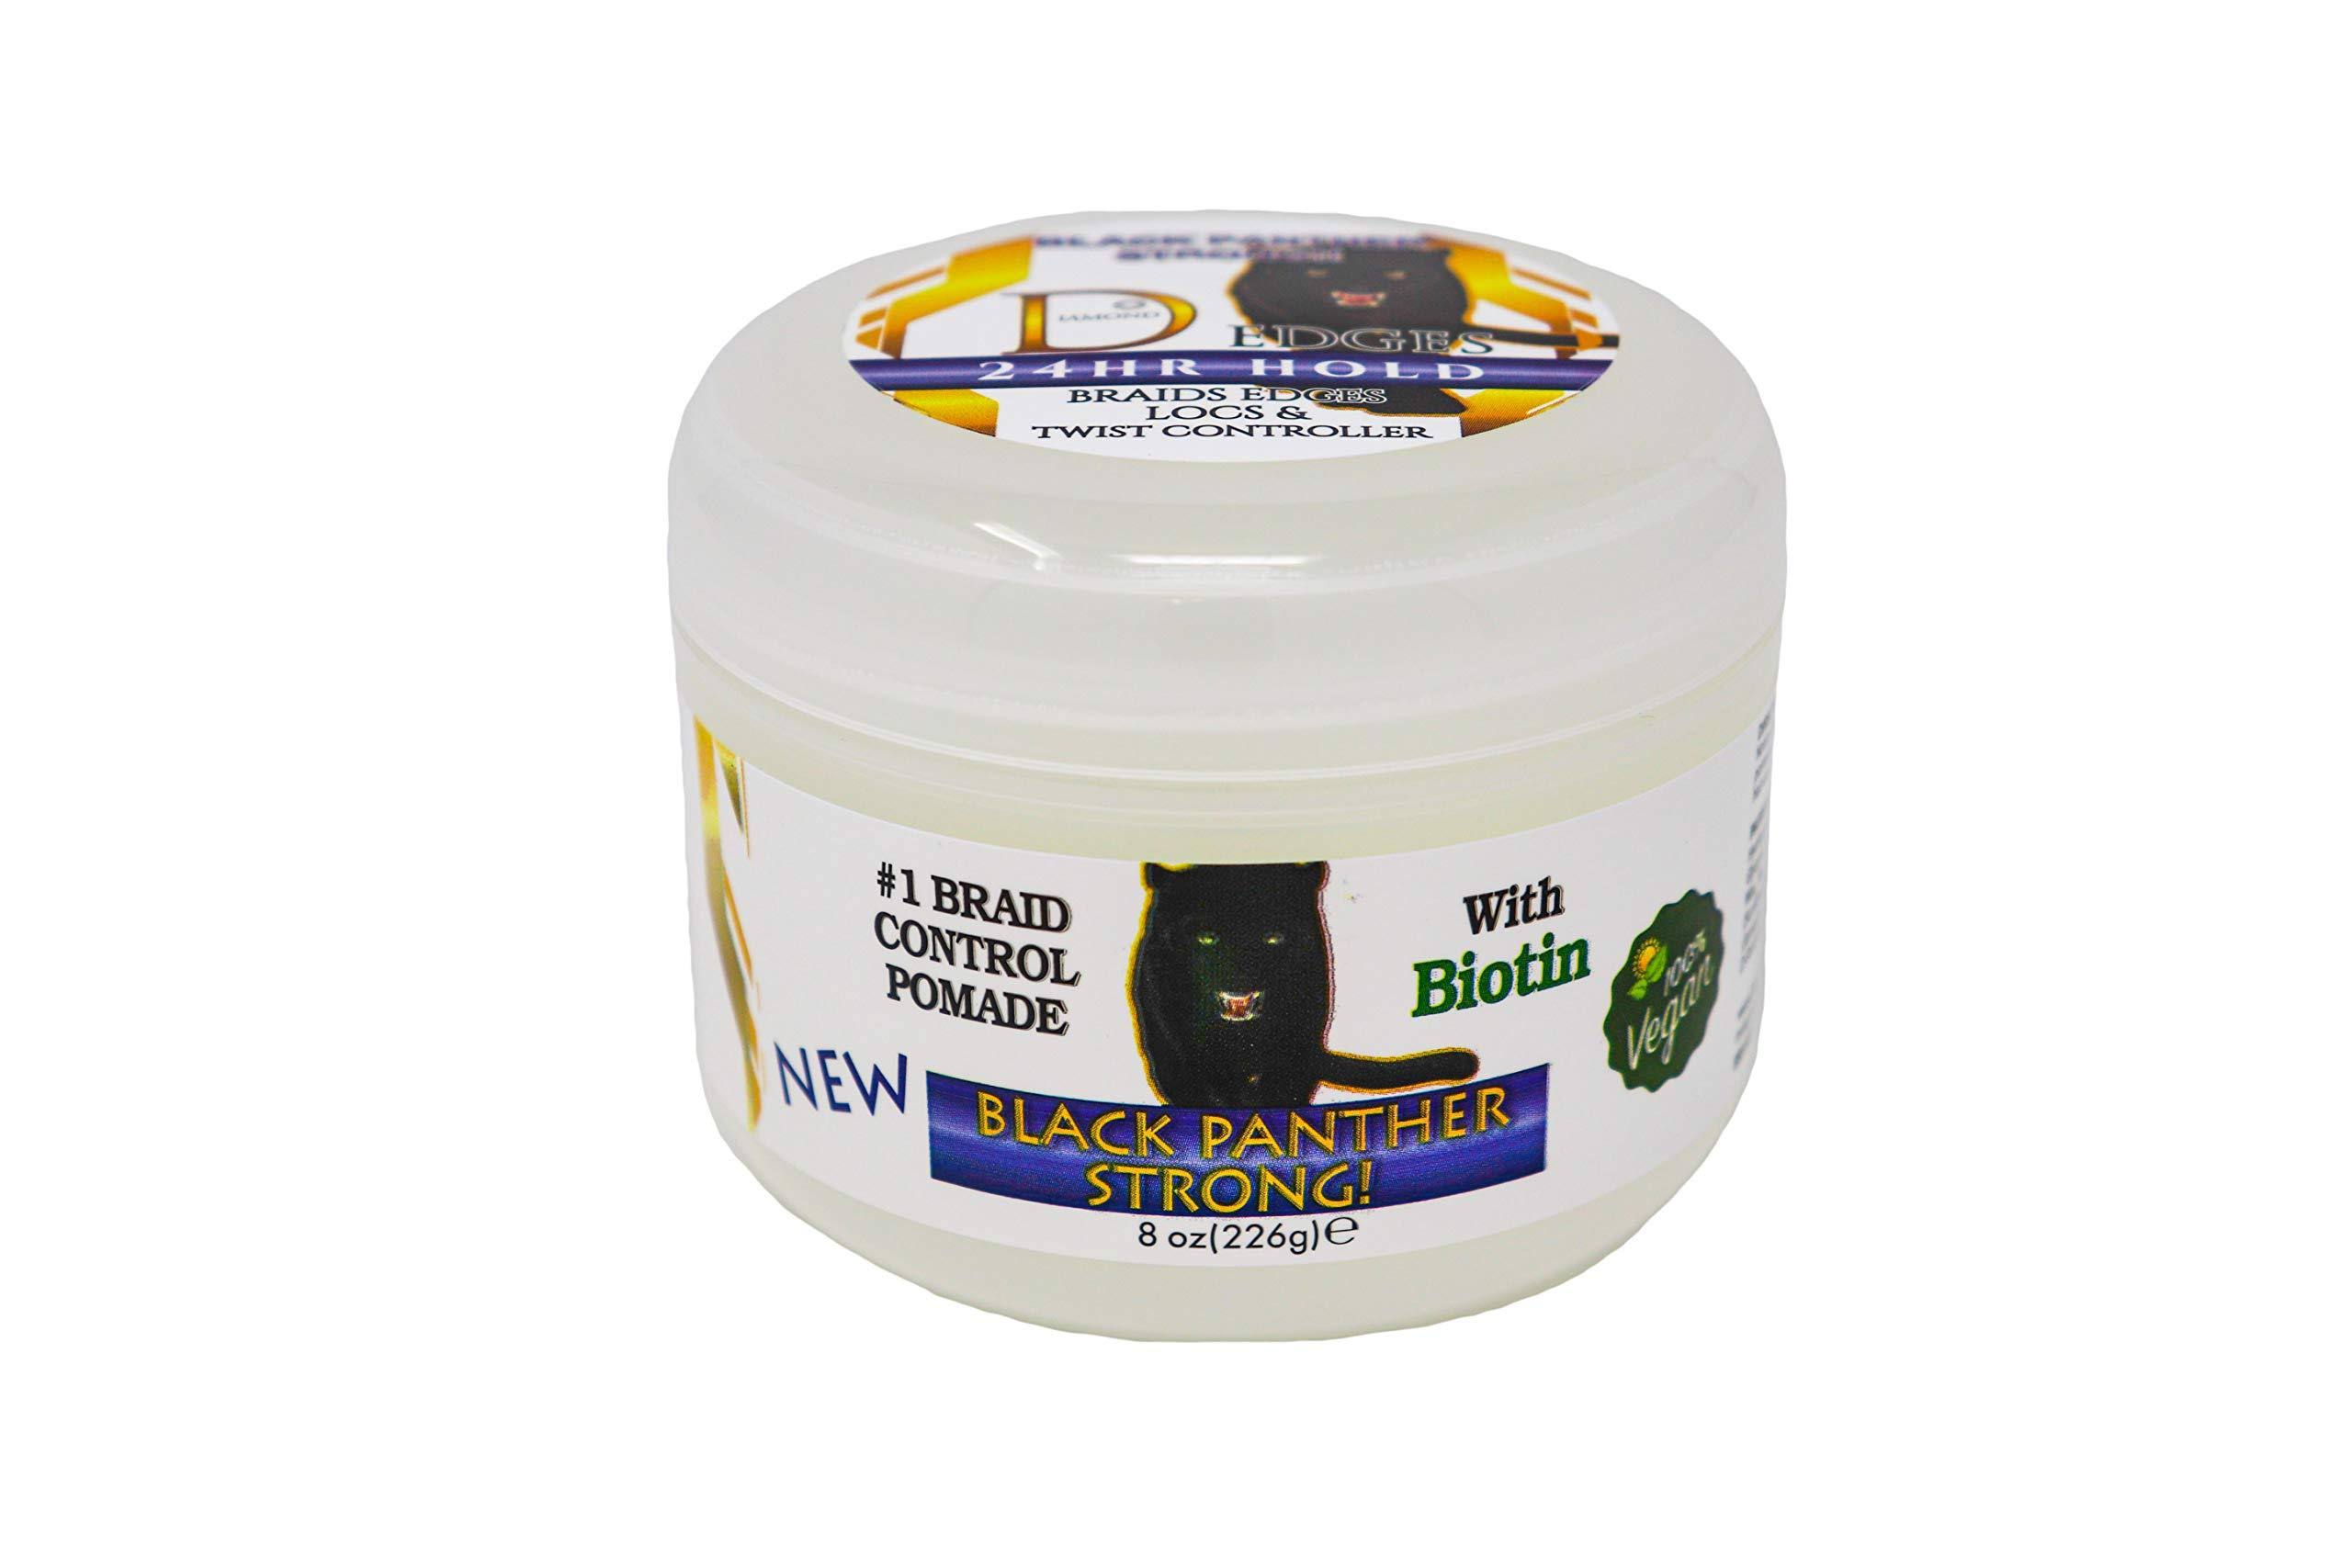 Black Panther Strong - Vegan - Edge and Braid Control Pomade 8 oz. Styling Gel